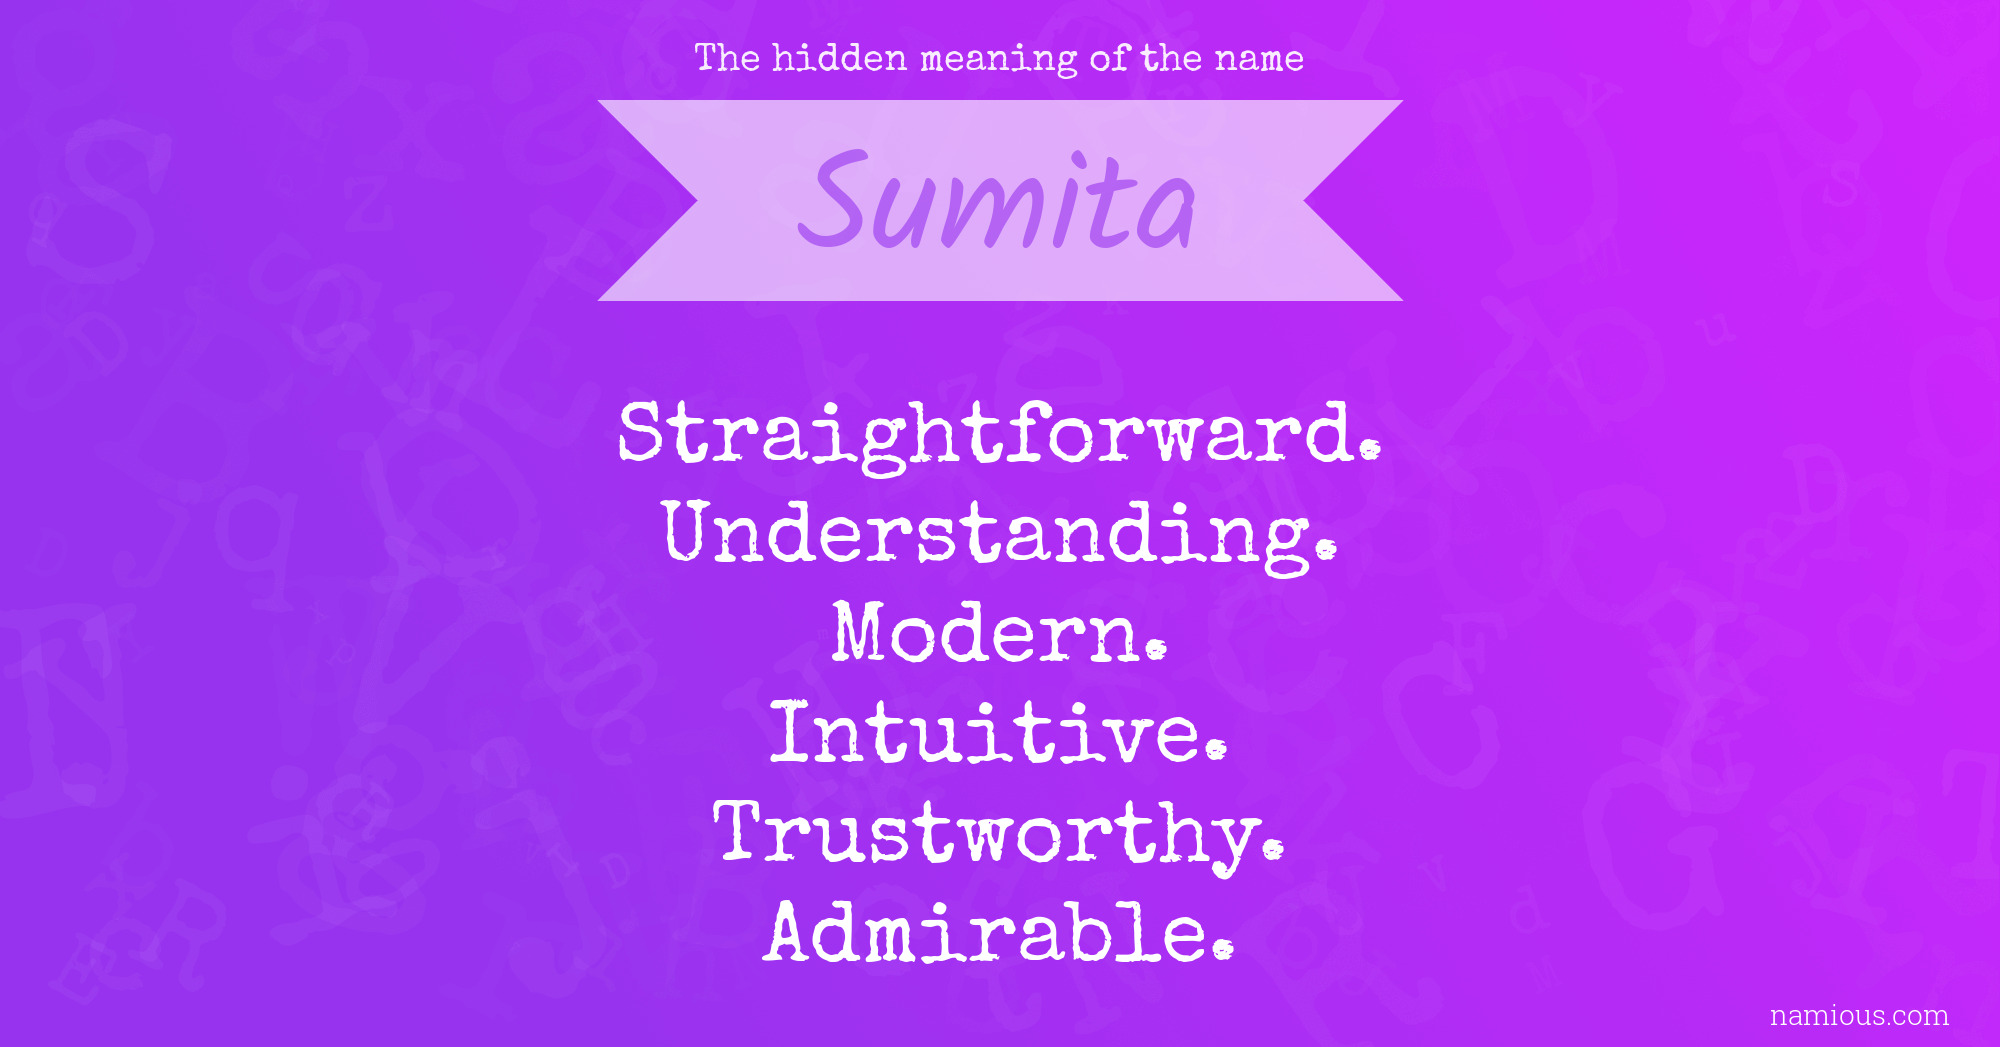 The hidden meaning of the name Sumita